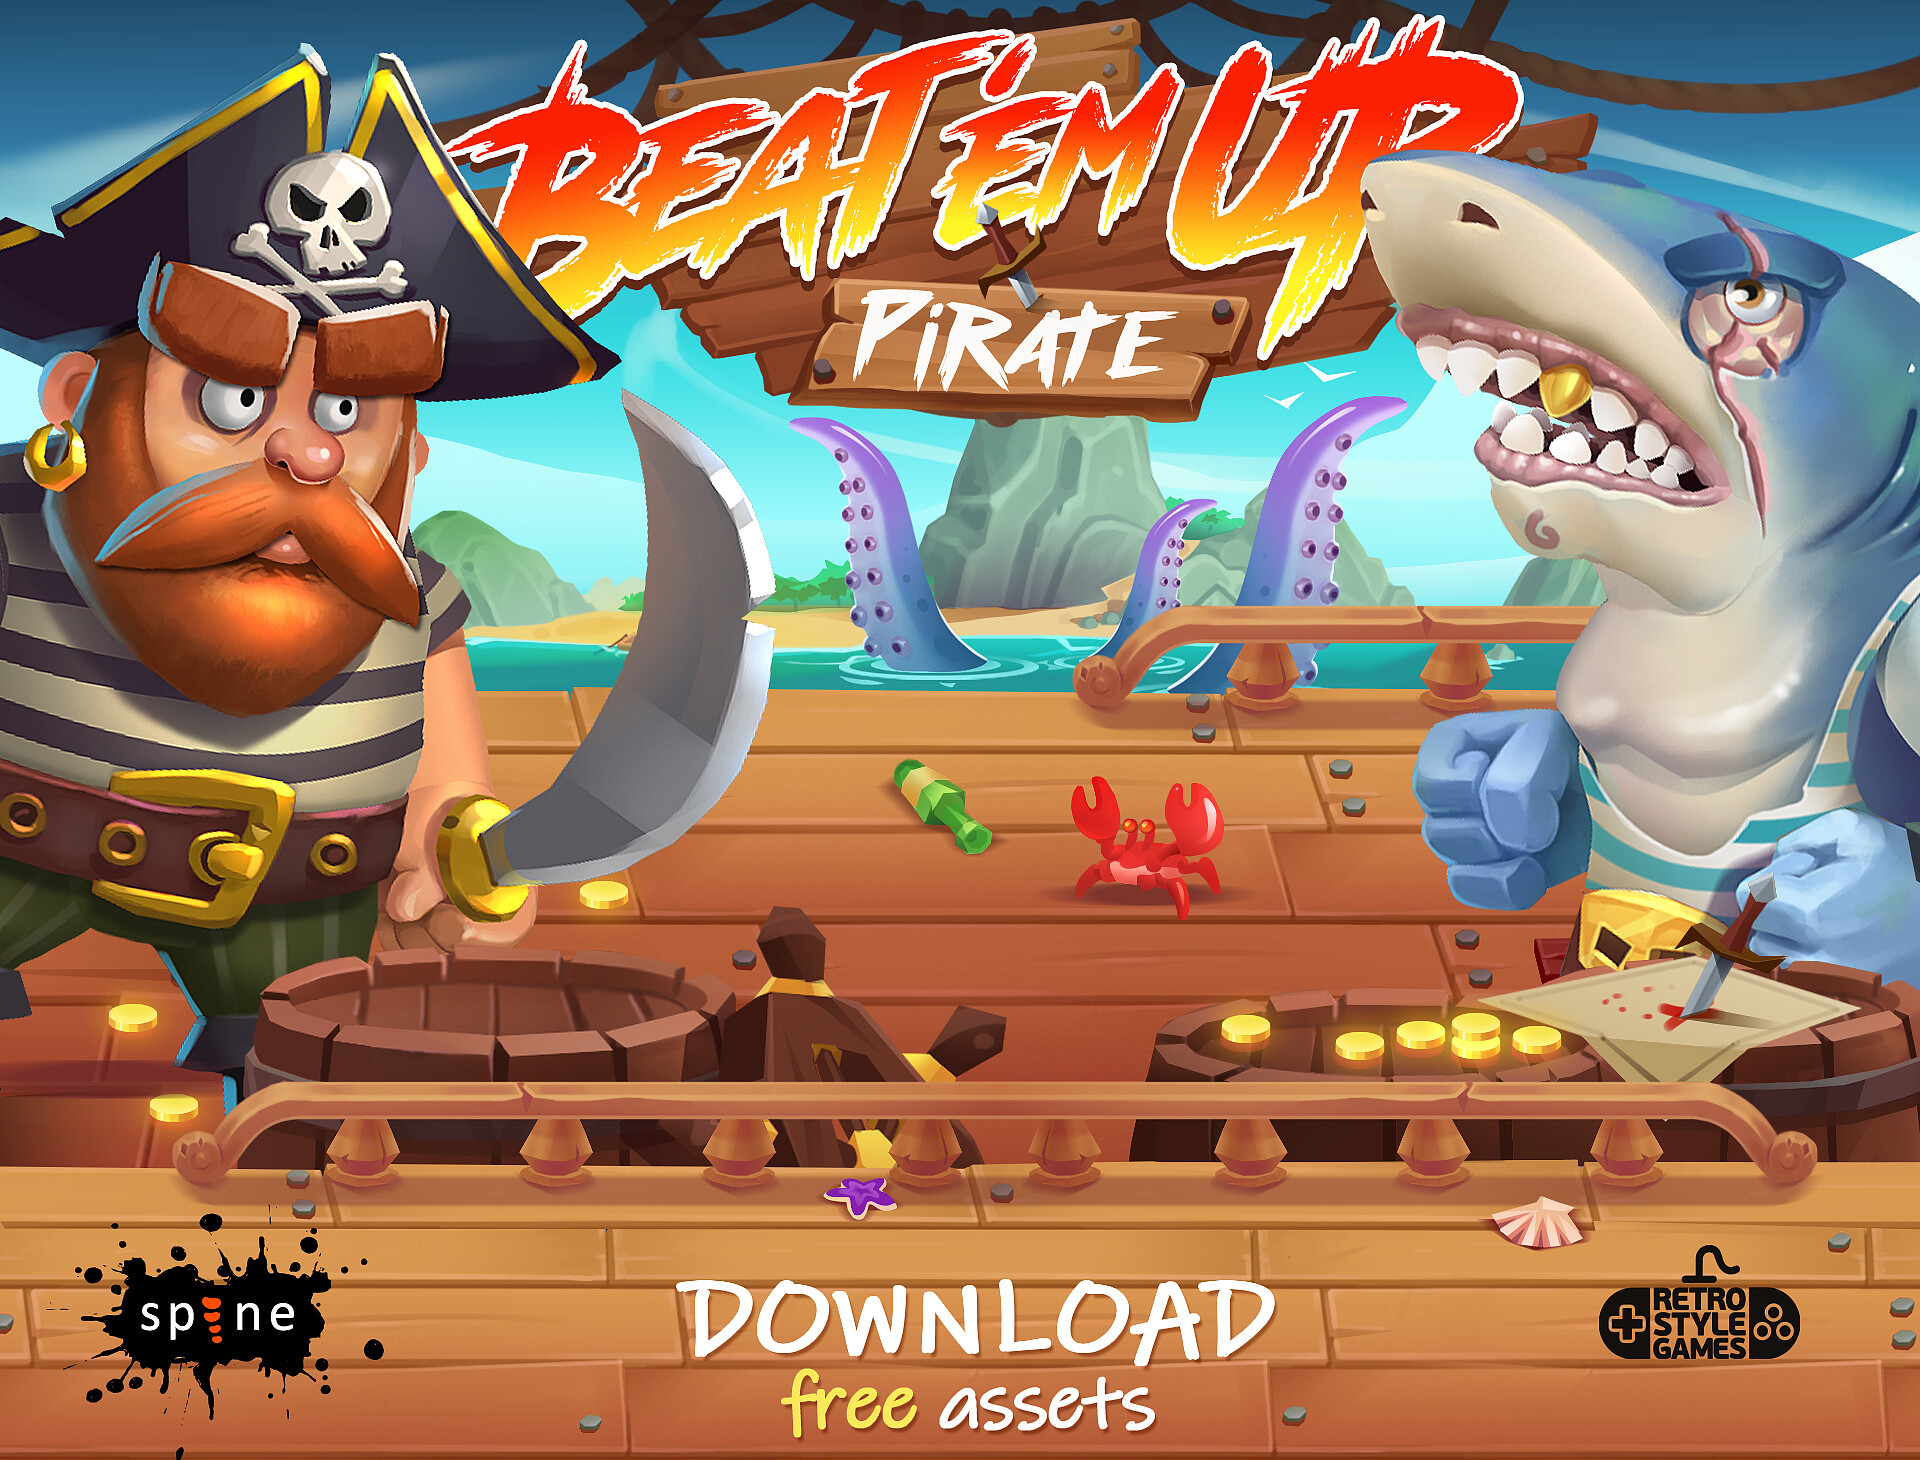 RetroStyle Games - Pirate Beat'em Up - Spine 2D Animation Unity Assets